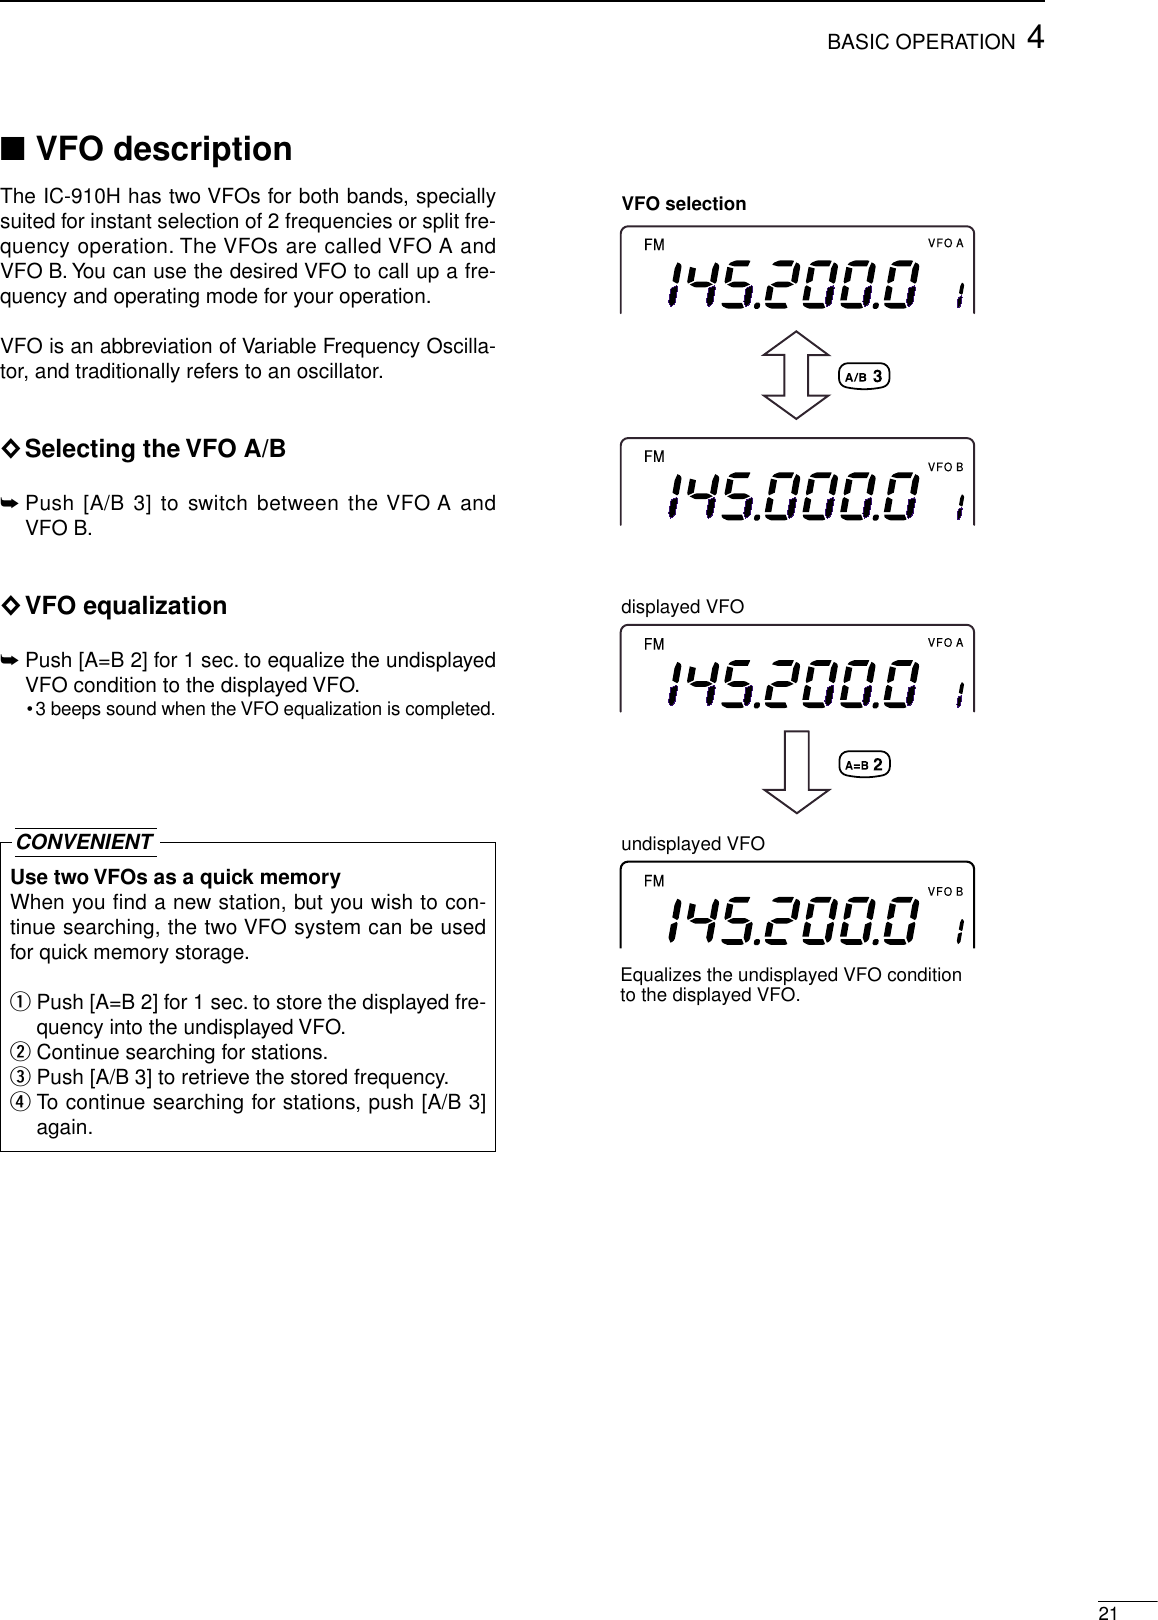 214BASIC OPERATION■VFO descriptionThe IC-910H has two VFOs for both bands, speciallysuited for instant selection of 2 frequencies or split fre-quency operation. The VFOs are called VFO A andVFO B. You can use the desired VFO to call up a fre-quency and operating mode for your operation.VFO is an abbreviation of Variable Frequency Oscilla-tor, and traditionally refers to an oscillator.◊Selecting the VFO A/B➥Push [A/B 3] to switch between the VFO A andVFO B.◊VFO equalization➥Push [A=B 2] for 1 sec. to equalize the undisplayedVFO condition to the displayed VFO.•3 beeps sound when the VFO equalization is completed.Use two VFOs as a quick memoryWhen you find a new station, but you wish to con-tinue searching, the two VFO system can be usedfor quick memory storage.qPush [A=B 2] for 1 sec. to store the displayed fre-quency into the undisplayed VFO.wContinue searching for stations.ePush [A/B 3] to retrieve the stored frequency.rTo continue searching for stations, push [A/B 3]again.CONVENIENTFMVFO AFMVFO BVFO selectionFMVFO AFMVFO Bundisplayed VFOEqualizes the undisplayed VFO conditionto the displayed VFO.displayed VFO